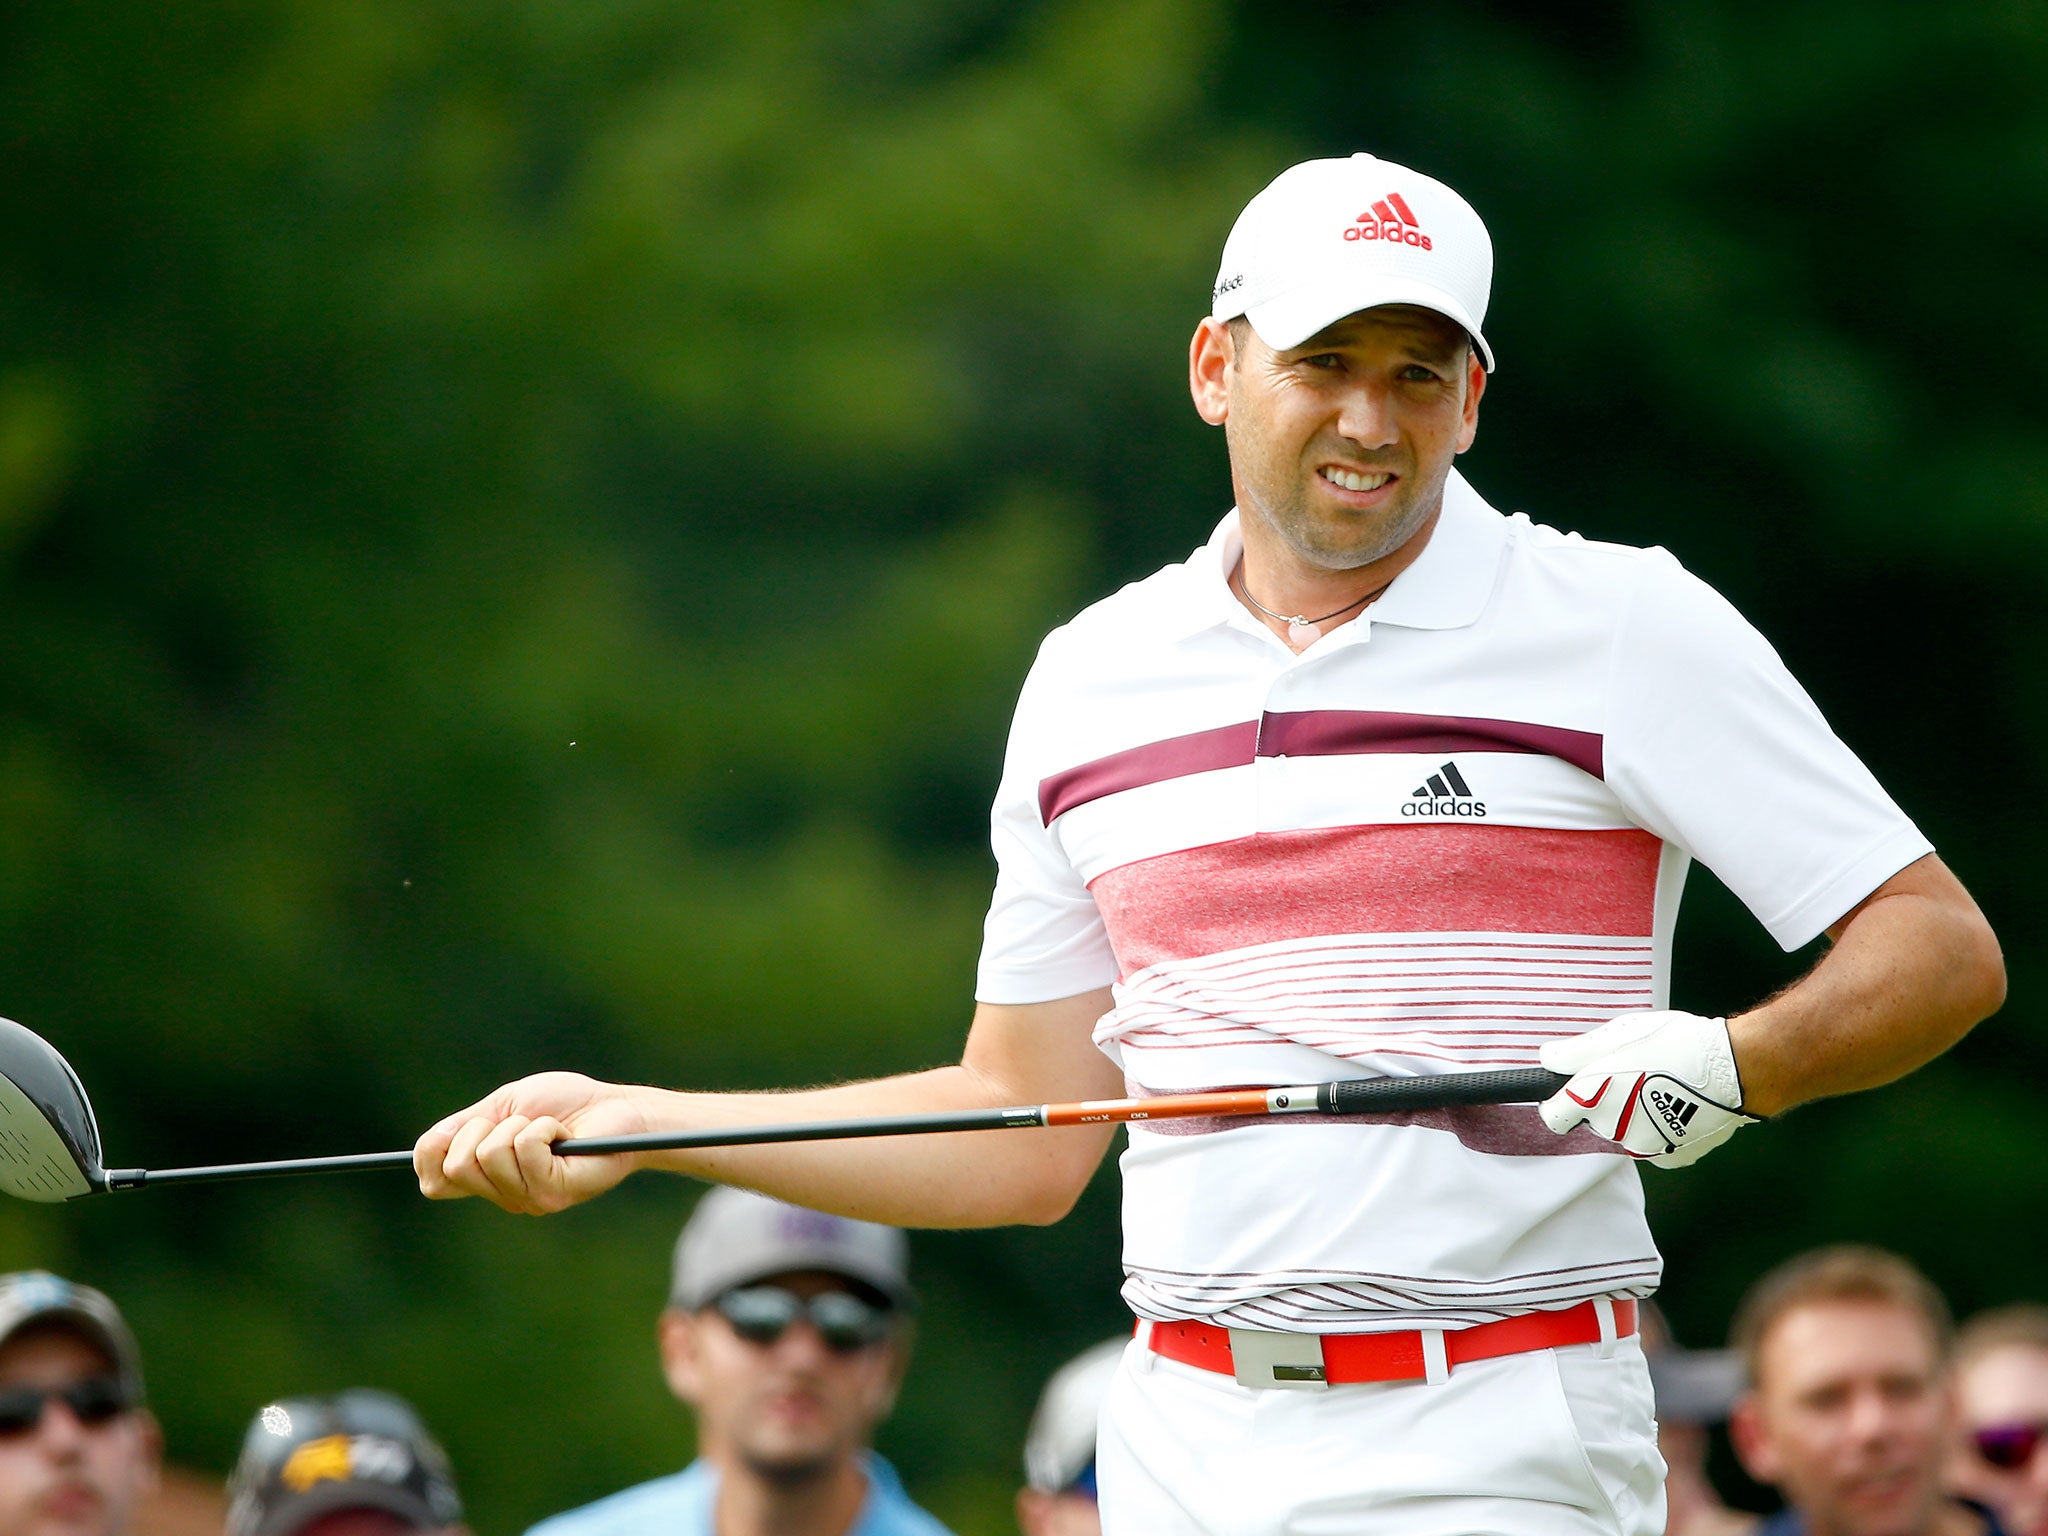 Sergio Garcia led by five shots on 14-under-par after 15 holes of his third round when weather intervened